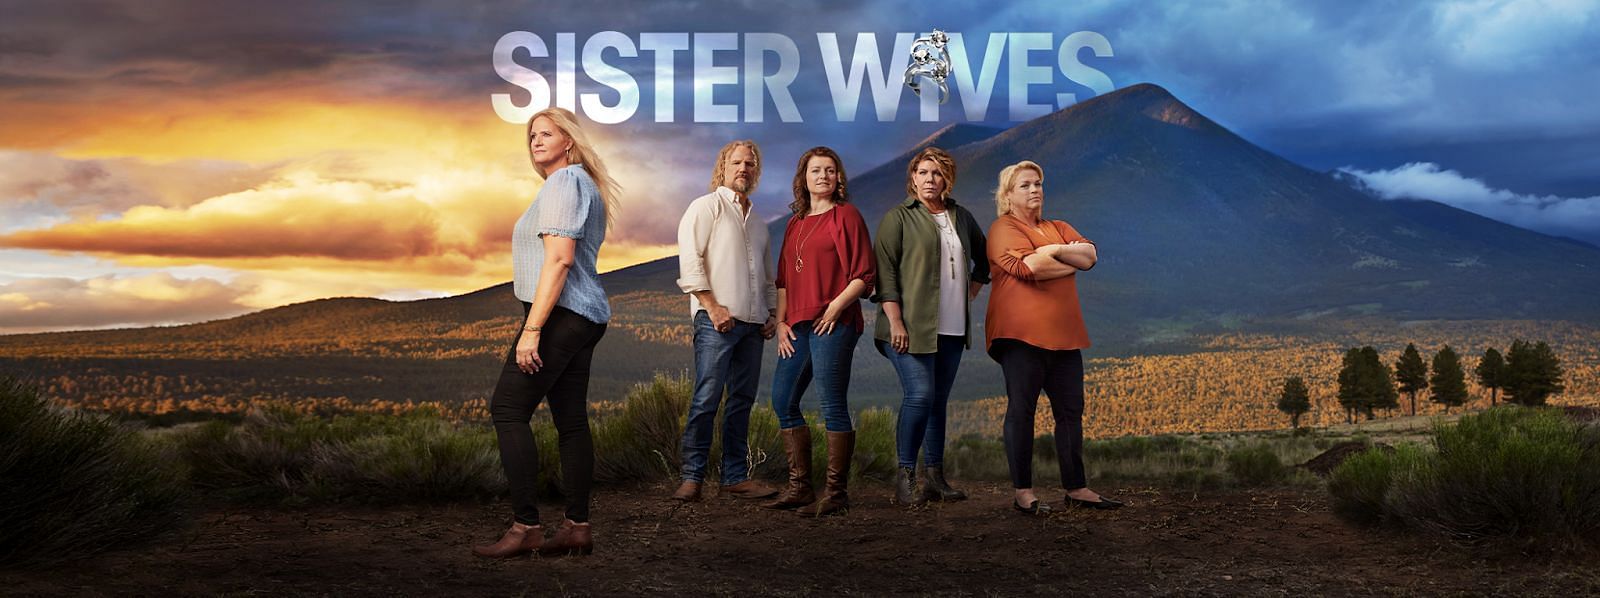 What is the plotline of Sister Wives?